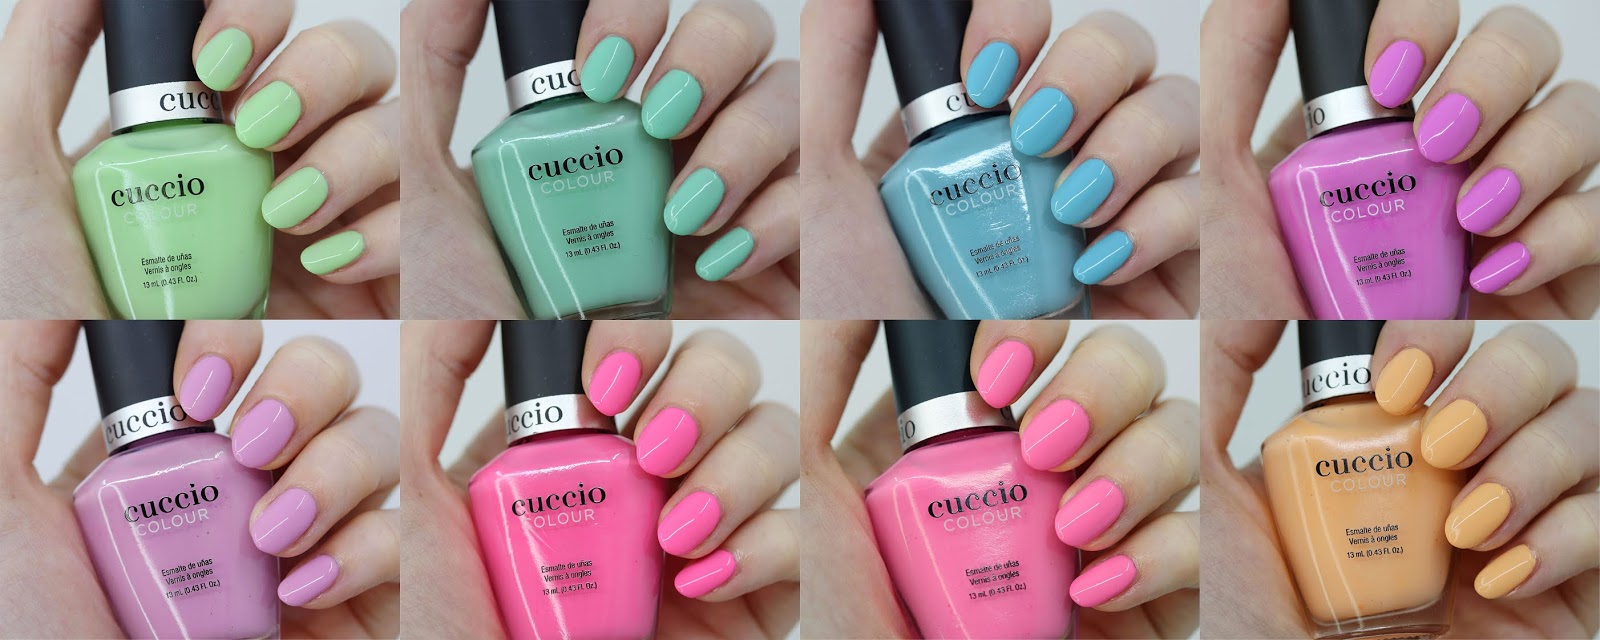 Cuccio Colour Rainbow Sorbet Summer Swatches Review The Daily Nail